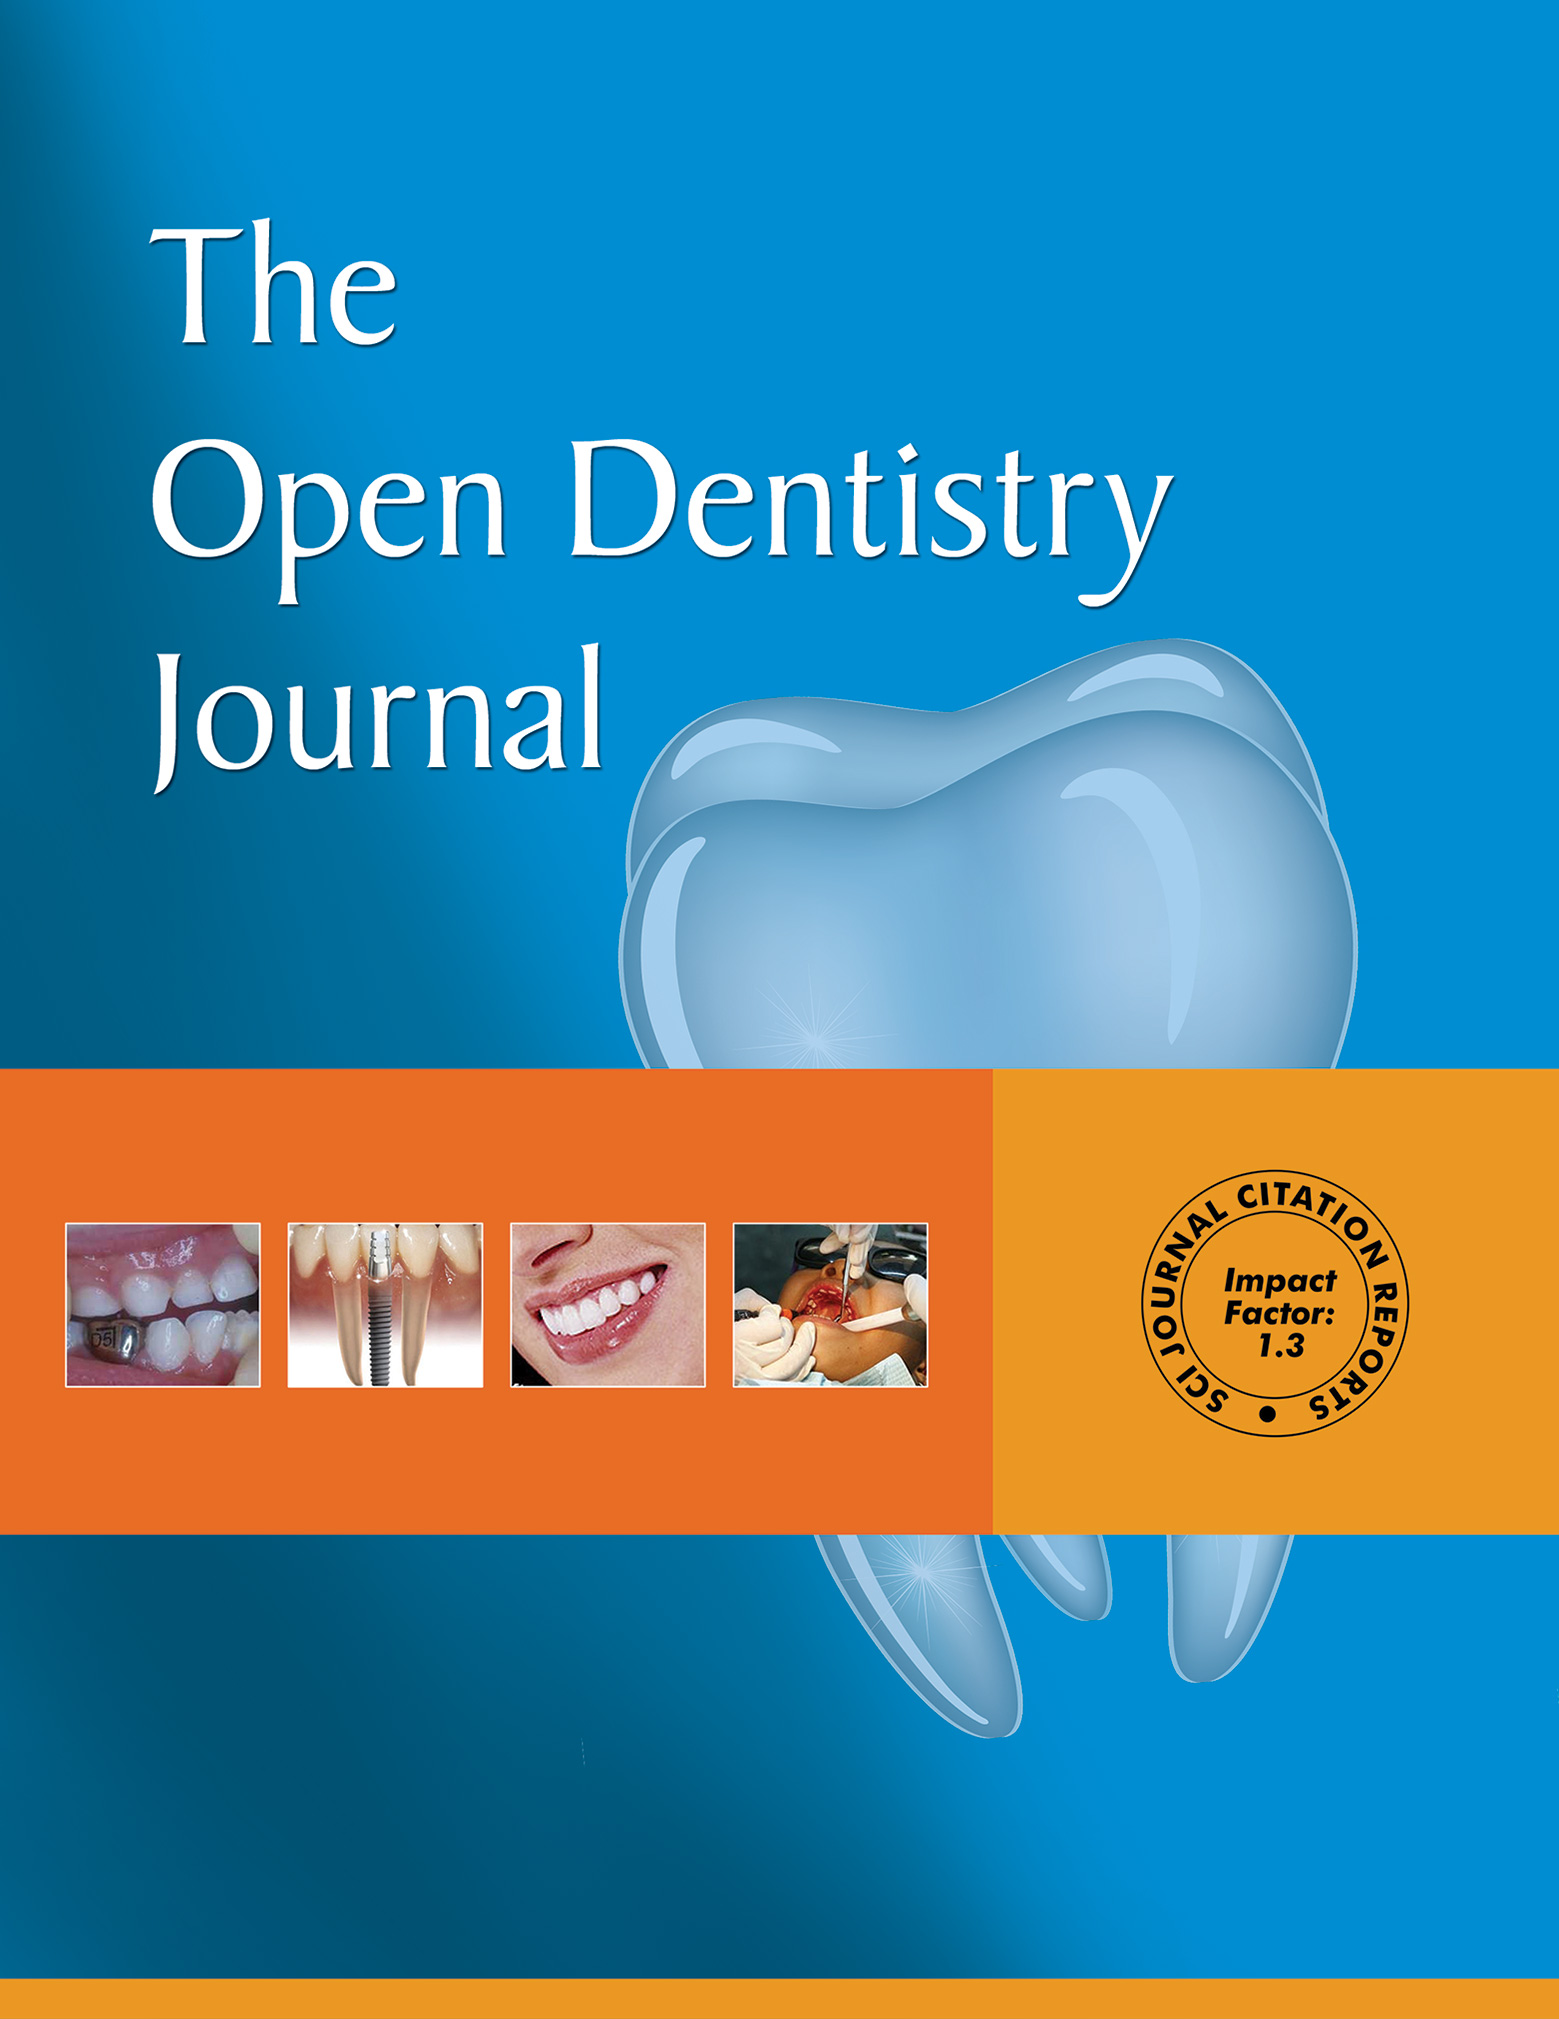 The Open Dentistry Journal